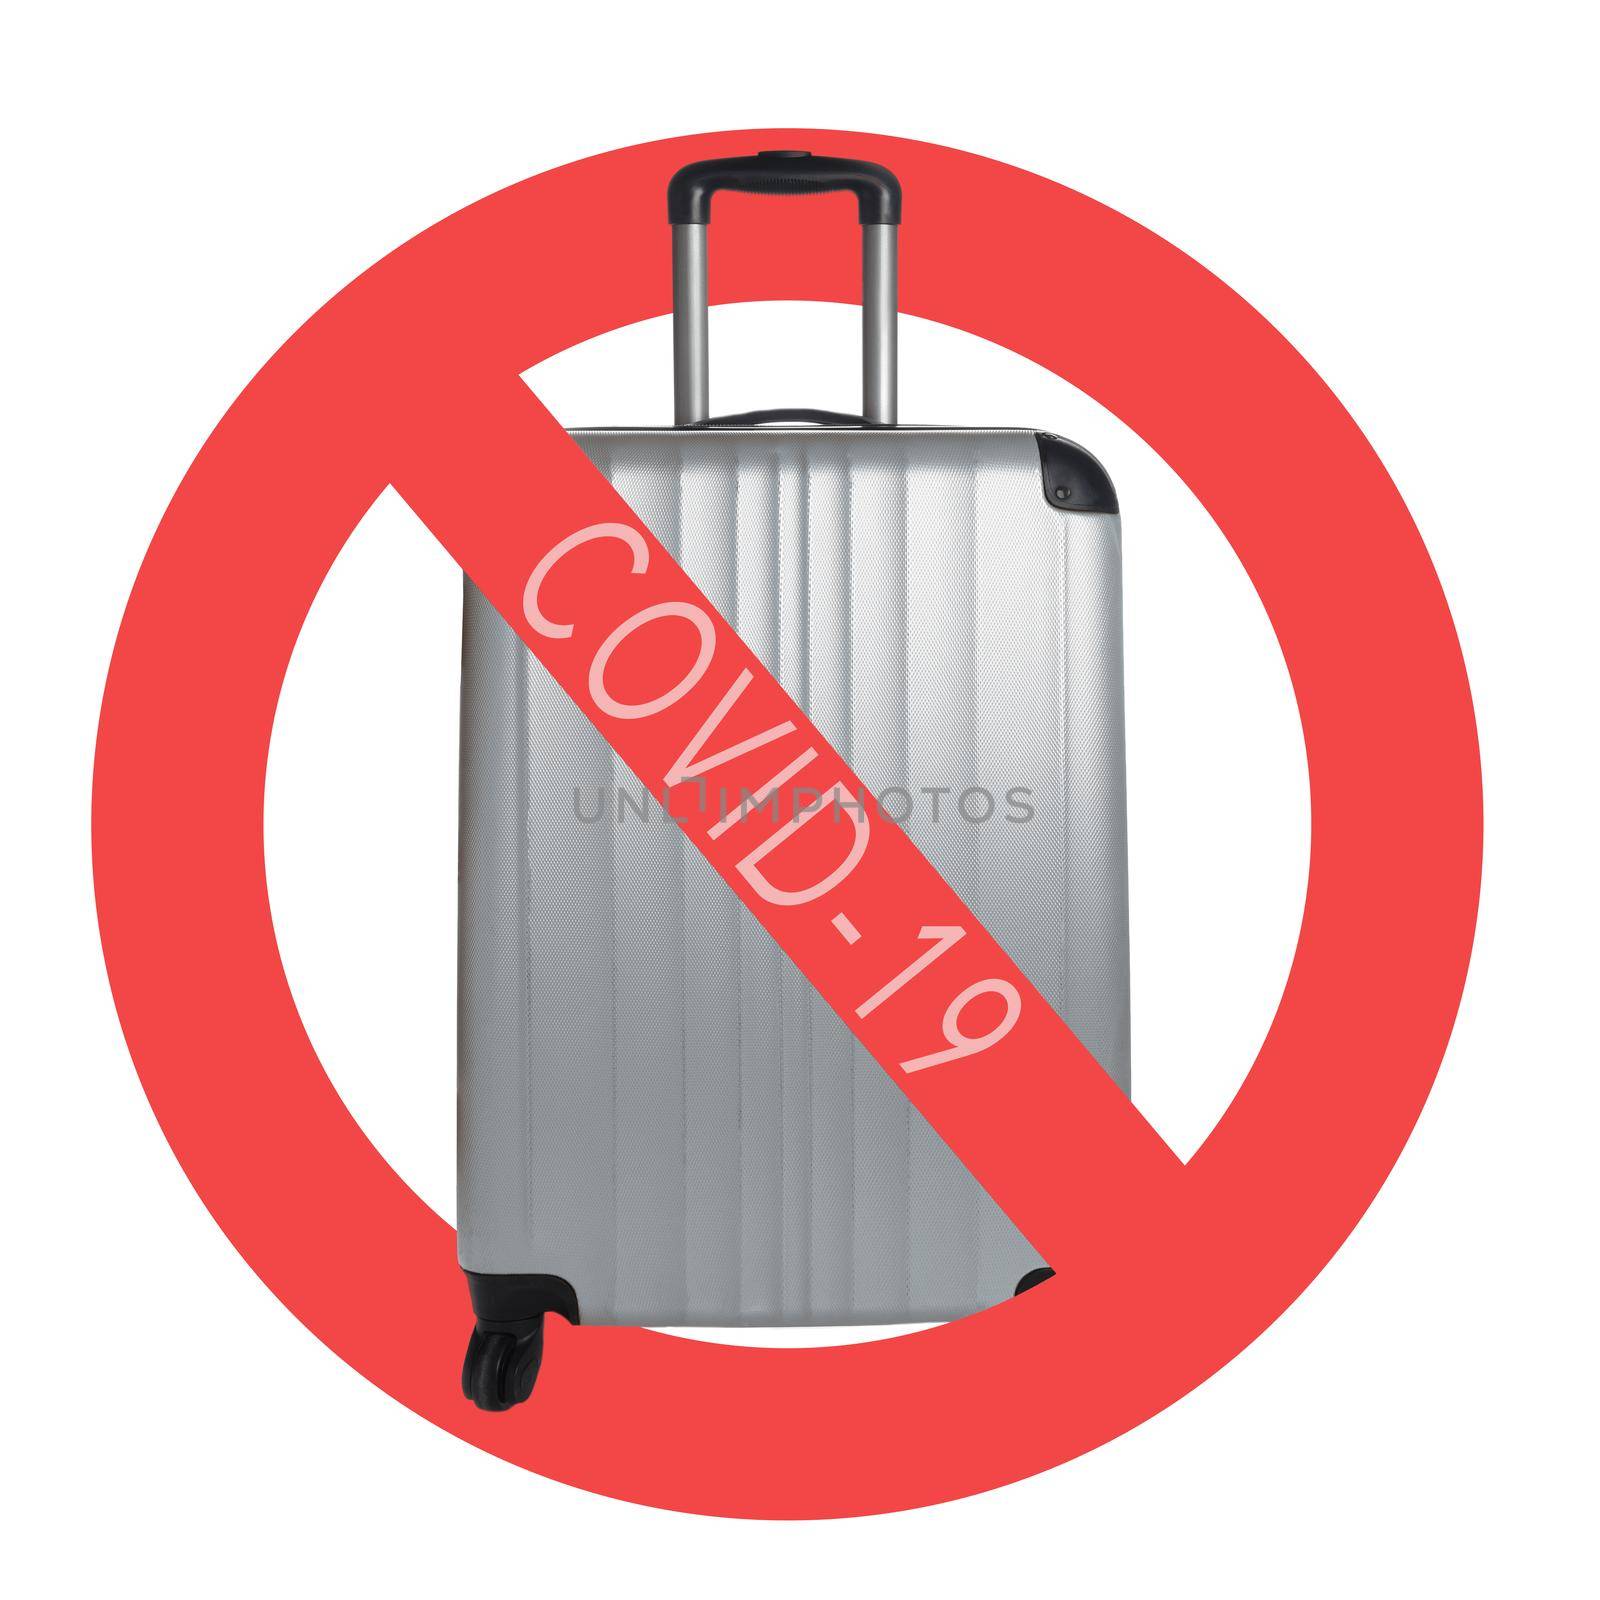 Silver Suitcase on a white background with international no symbol and COVID-19. Cancelled trip tourism restrictions concept during pandemic. by sCukrov